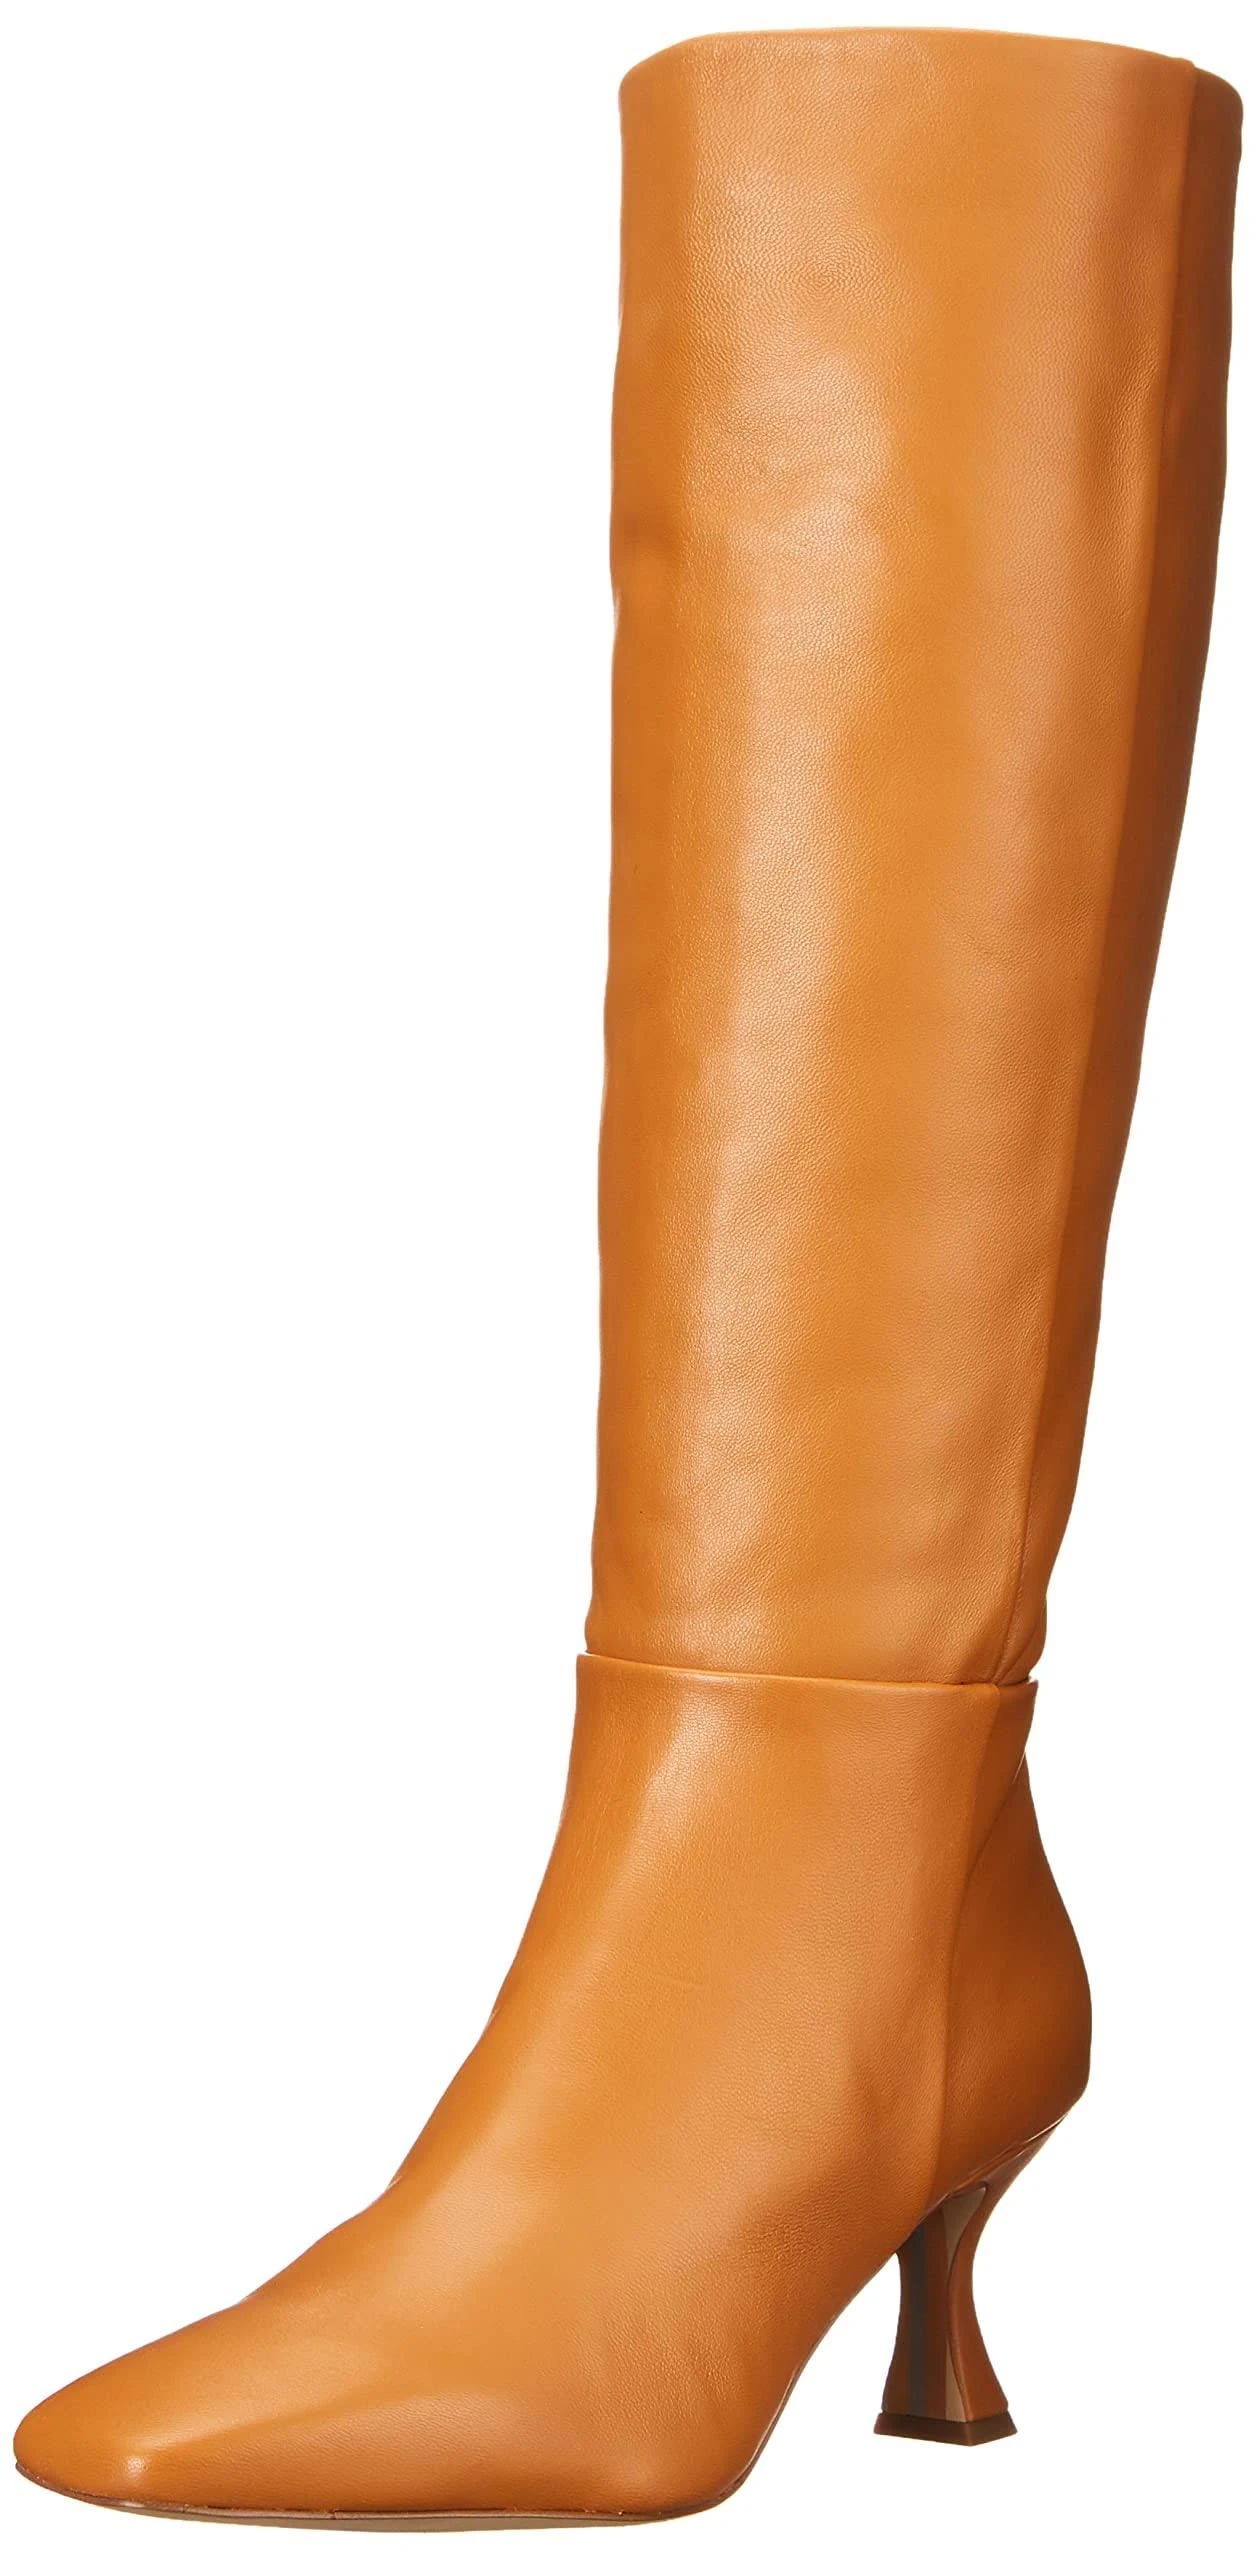 Fashionable Knee-High Camel Leather Boots | Image